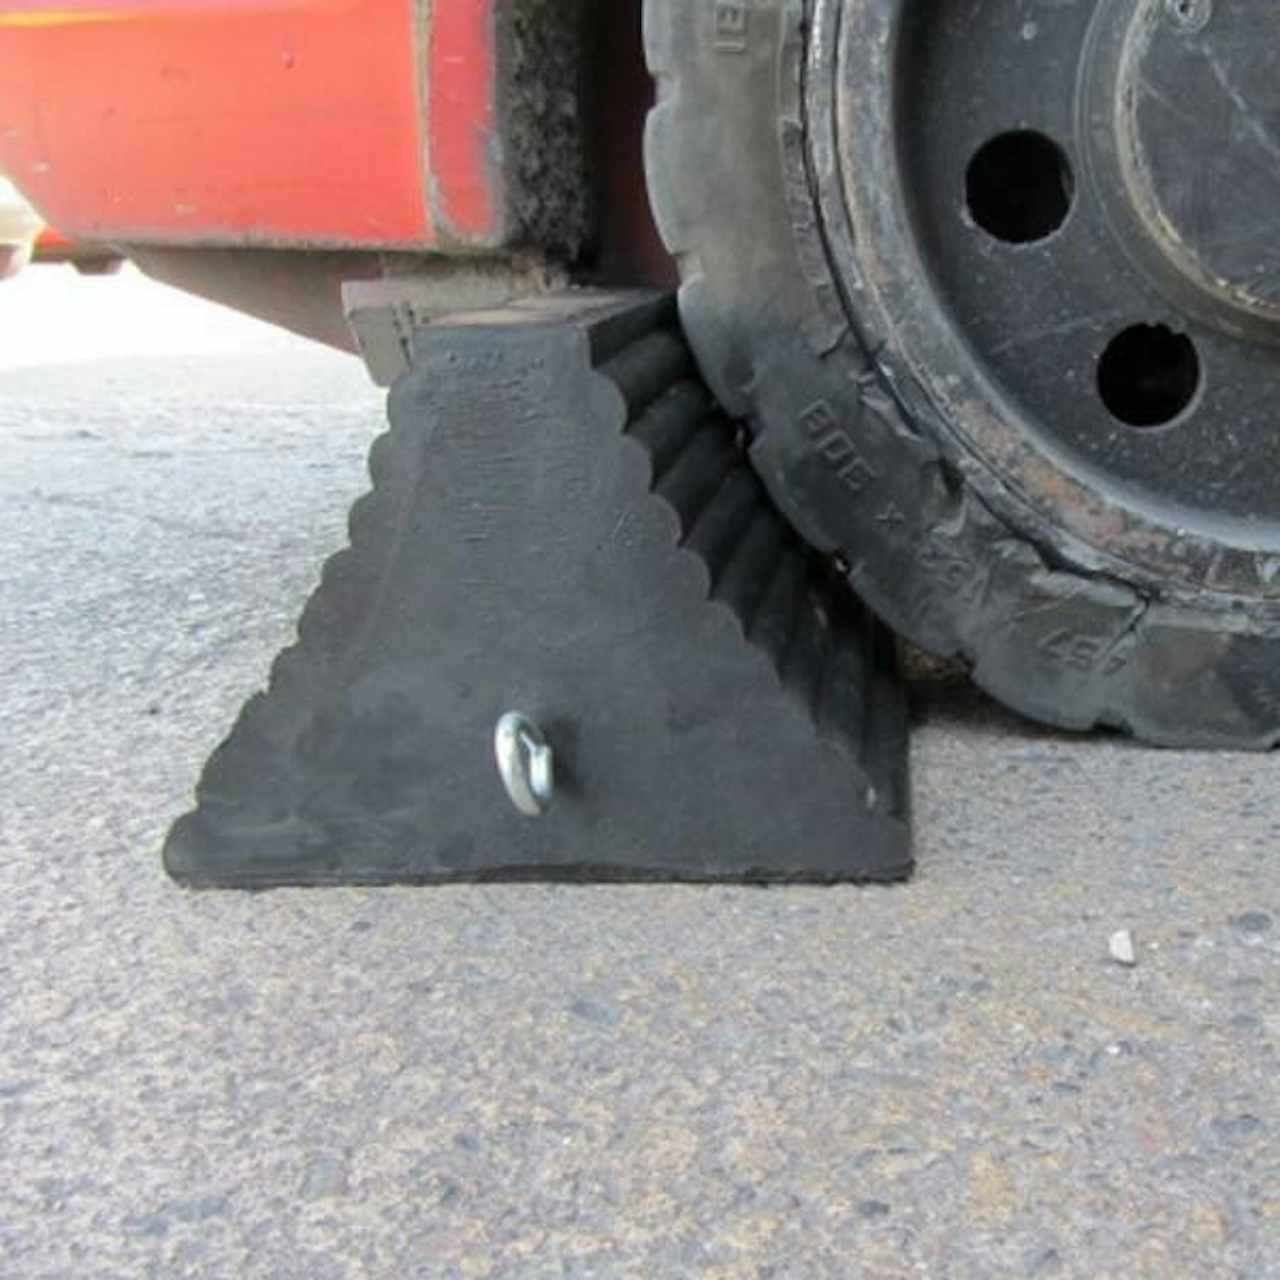 Folding Steel Tire Slope Anti-skid Chocks Heavy Duty Wheel Chocks For Repairing Vehicles Or Loading And Unloading Items 